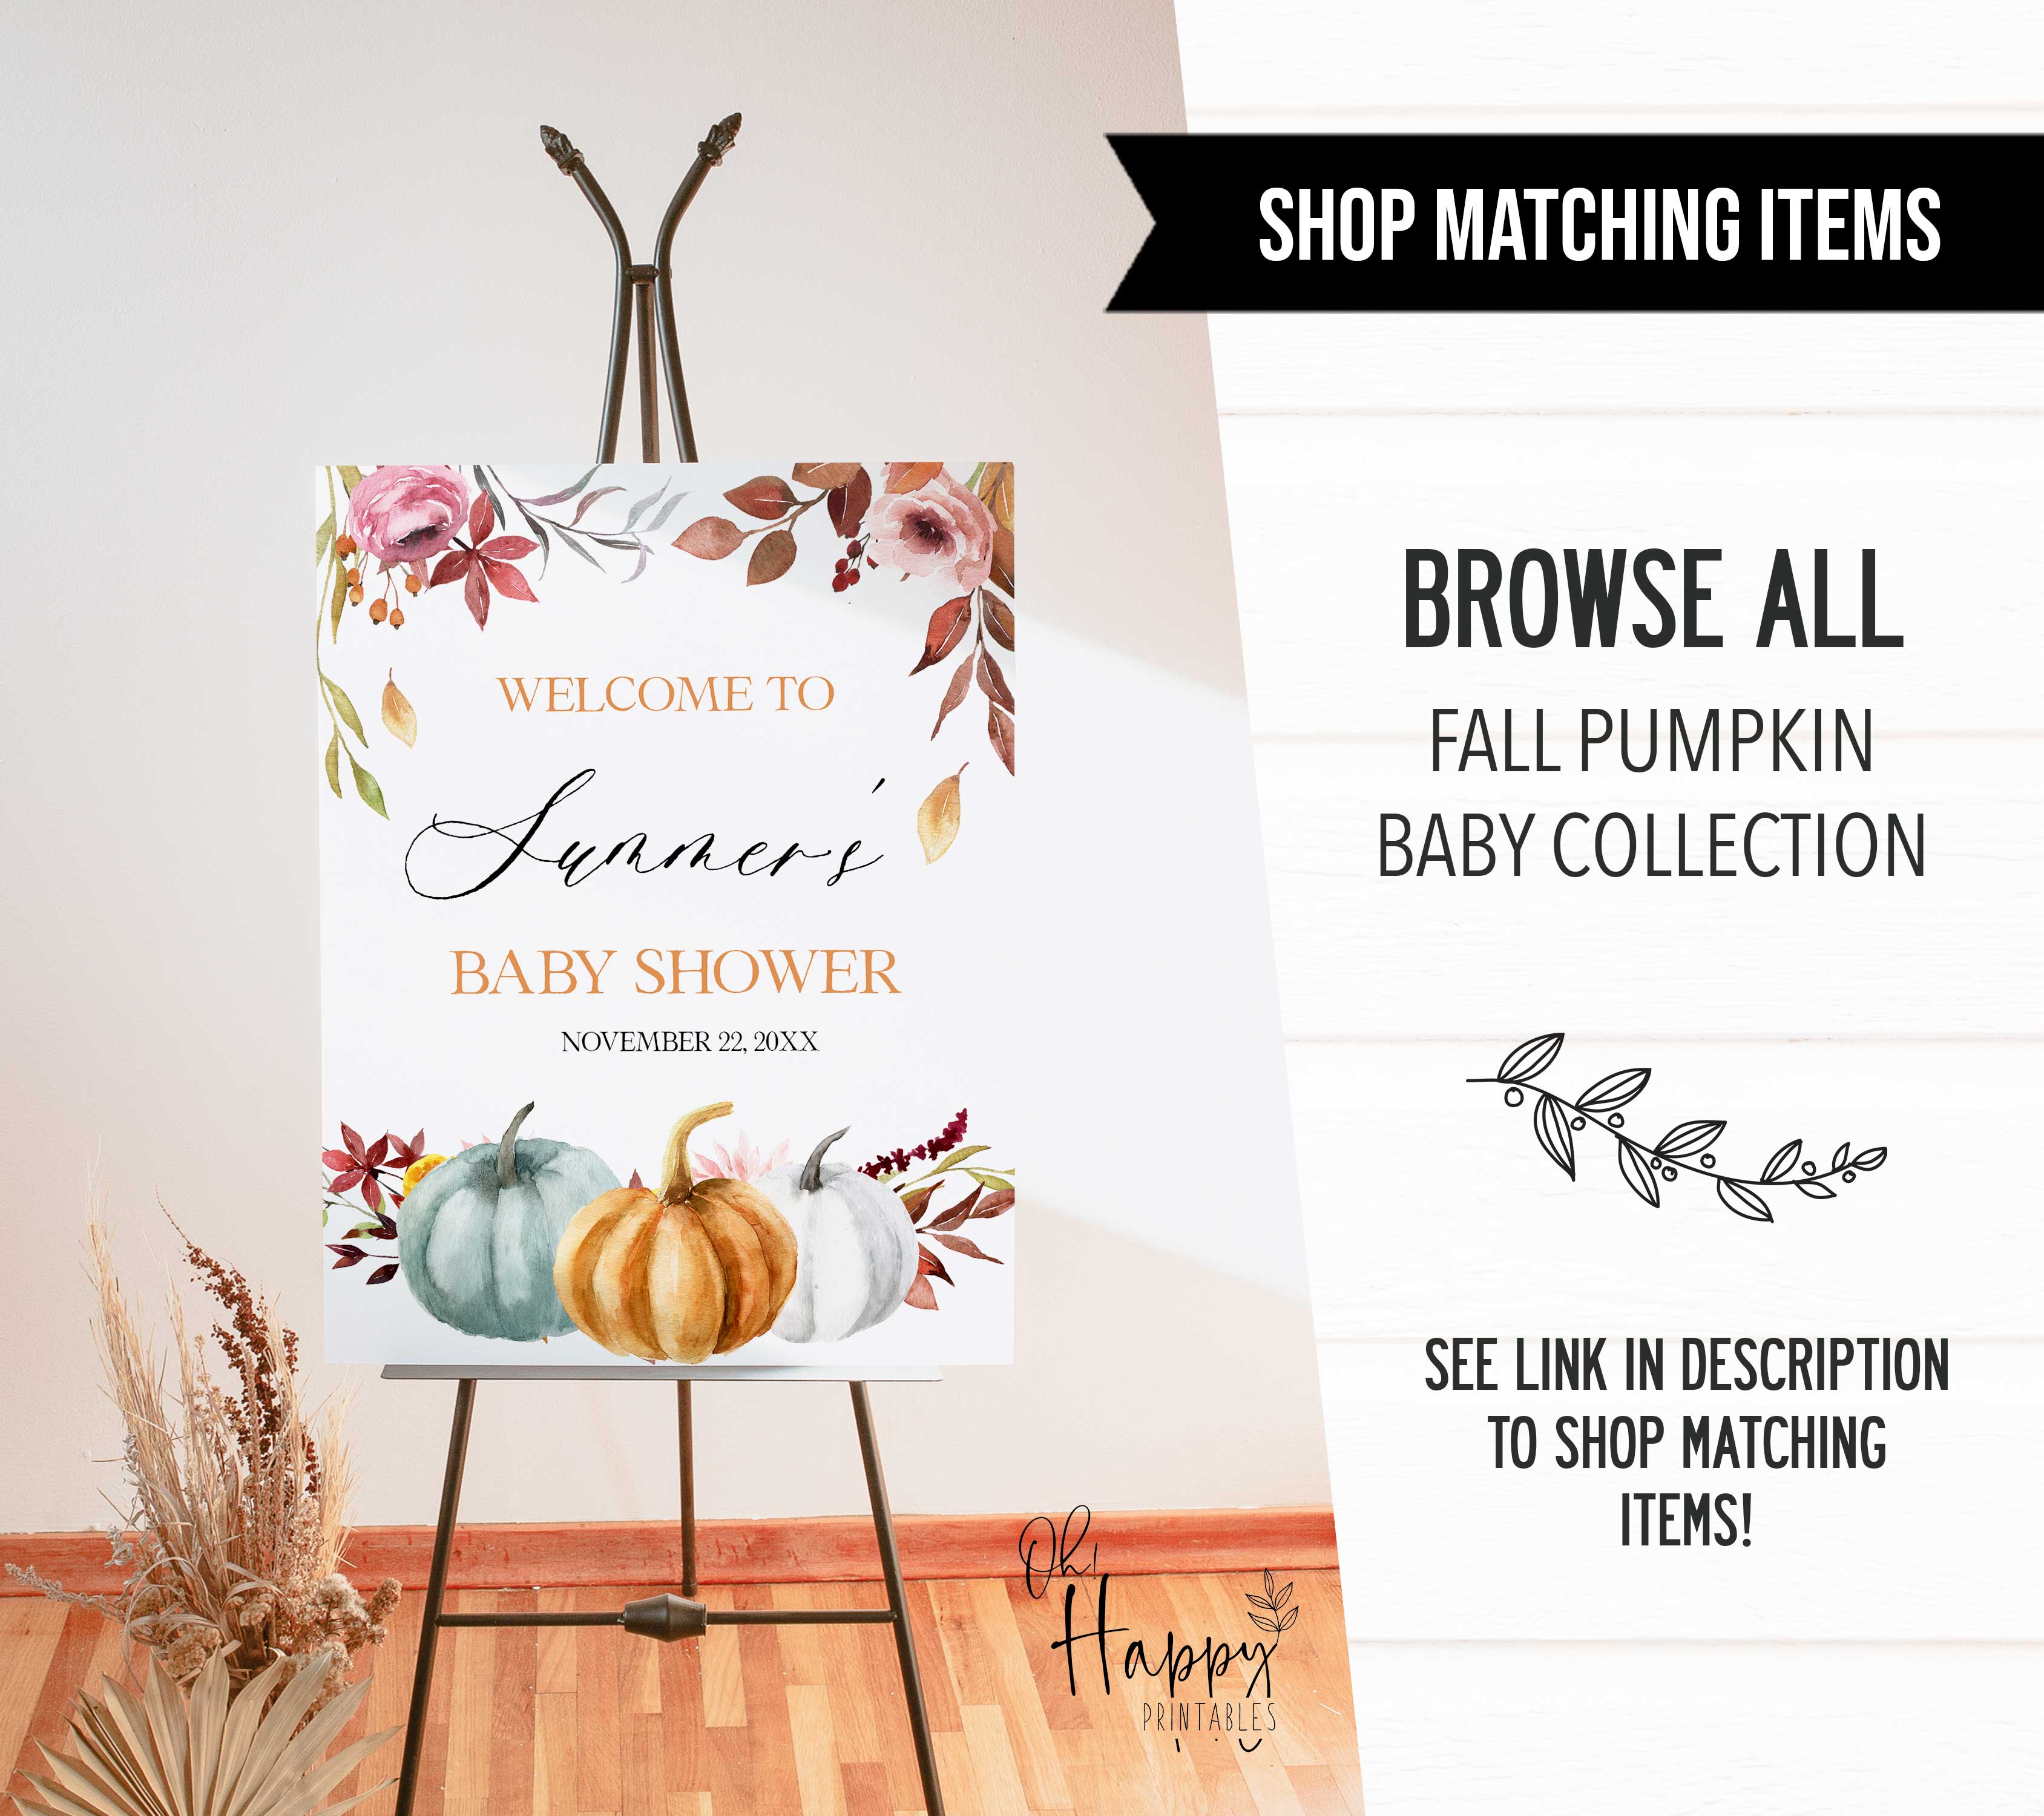 Fully editable and printable baby shower pacifier hunt game with a fall pumpkin design. Perfect for a Fall Pumpkin baby shower themed party